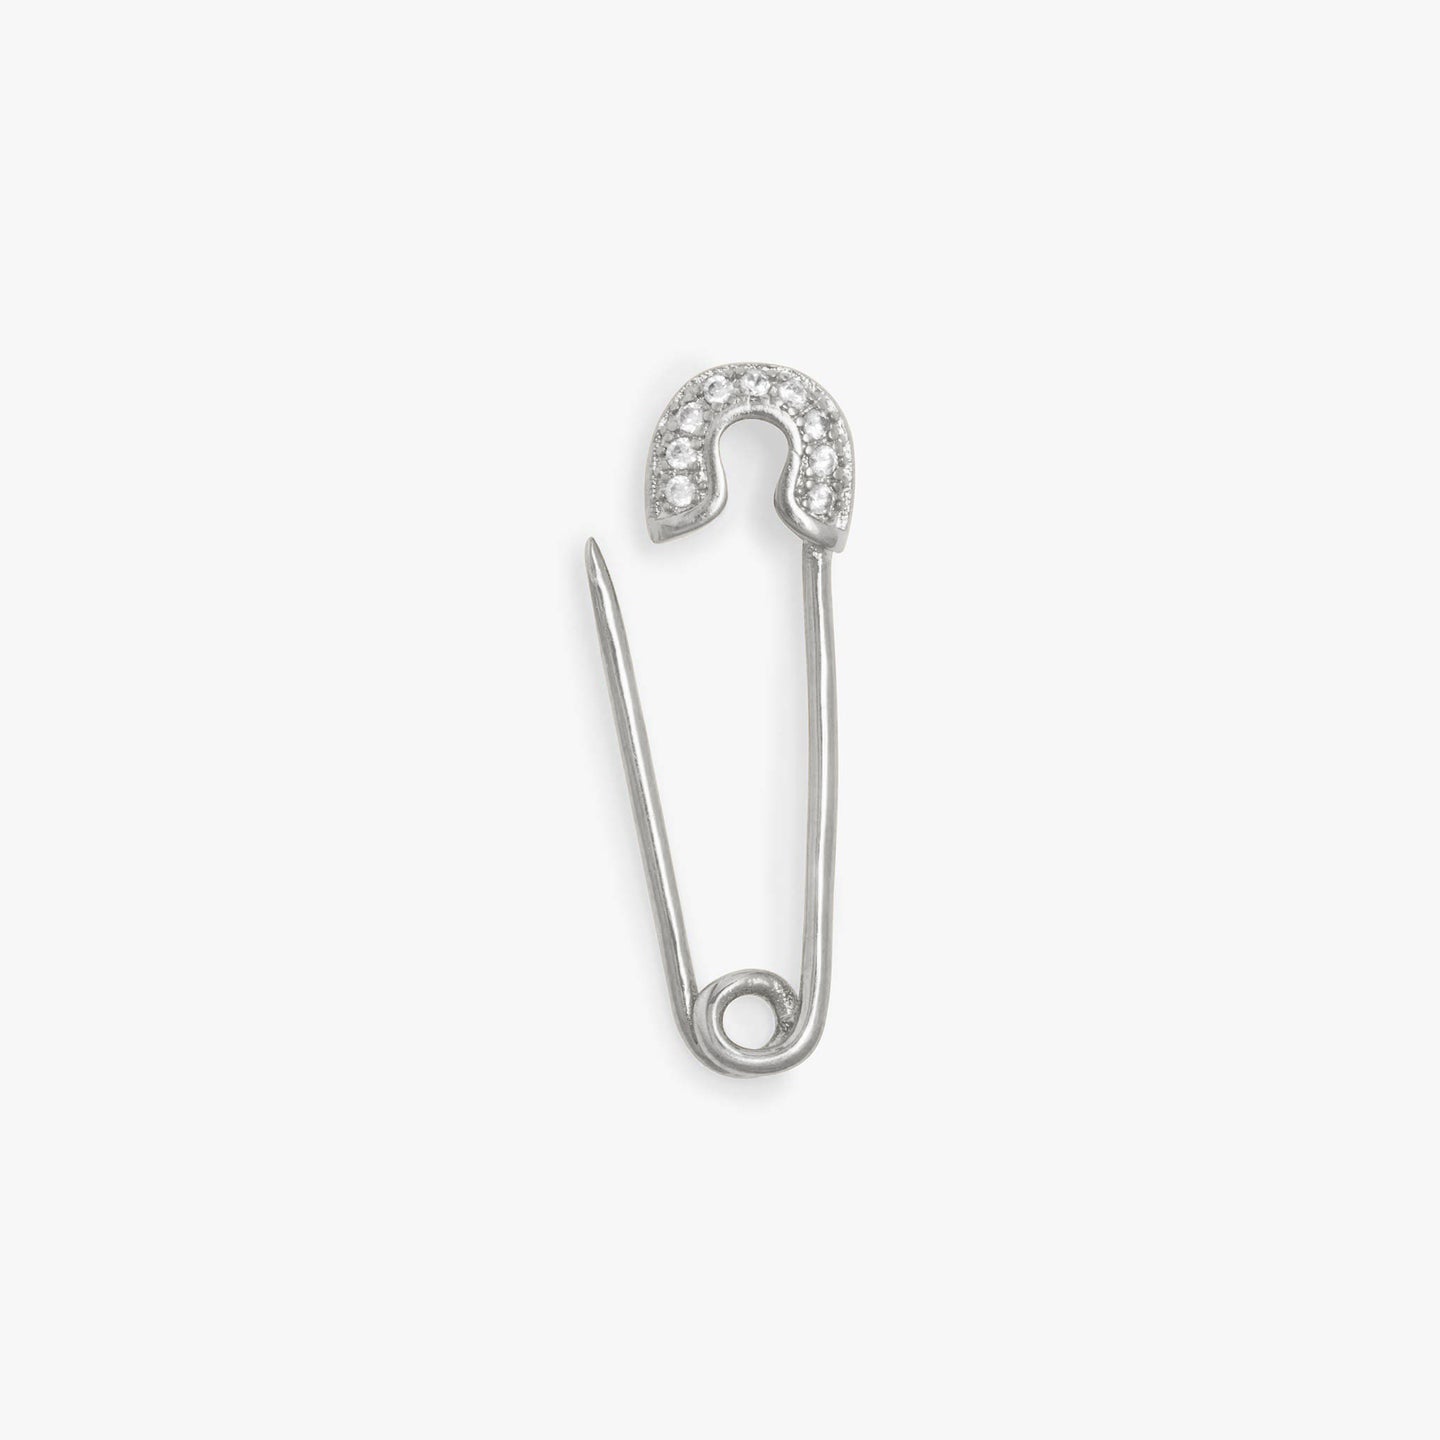 Small safety pin earring with CZ details. color:silver/clear